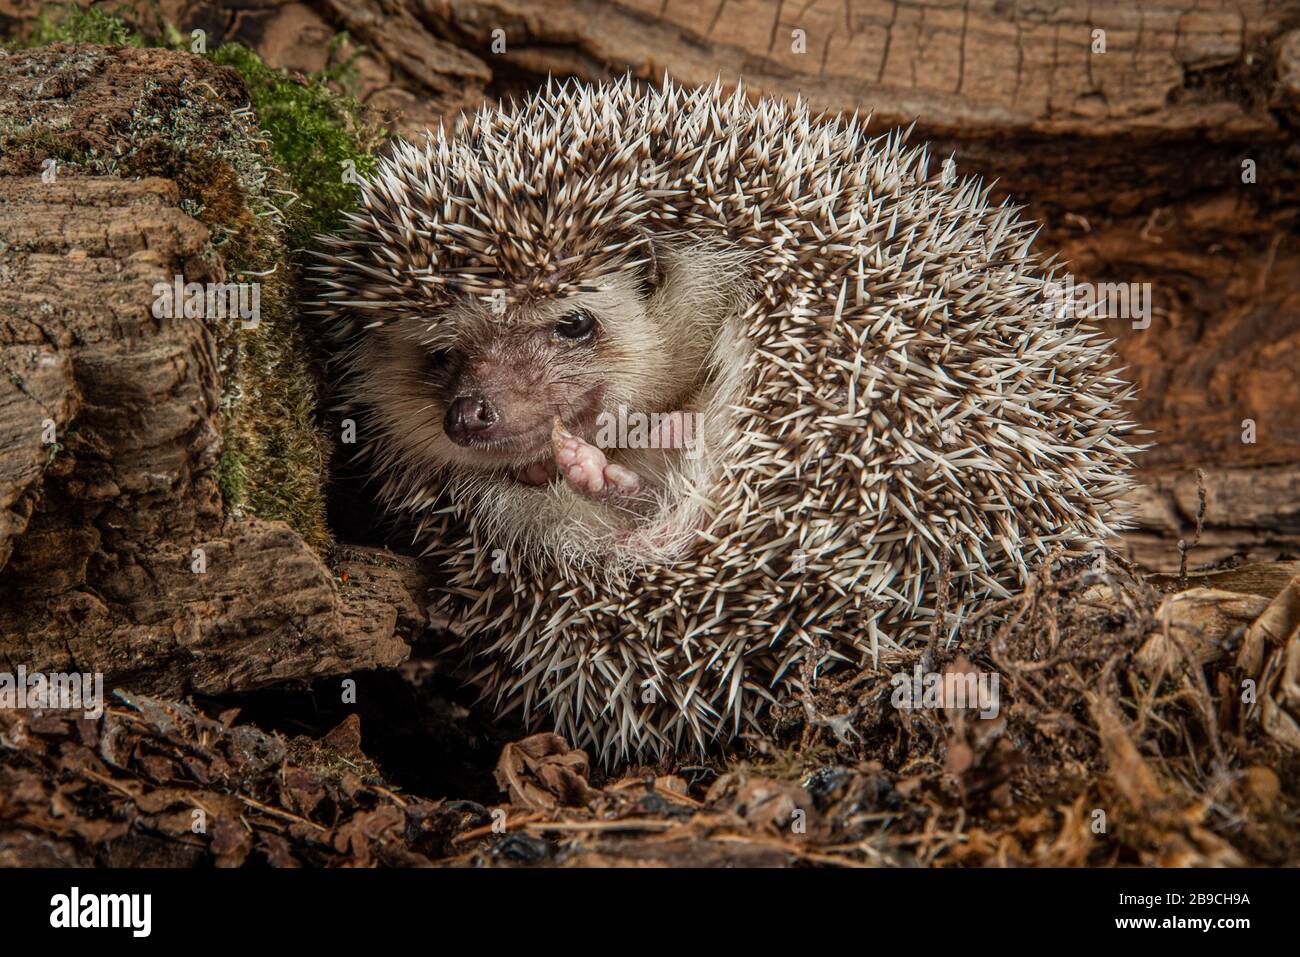 A european hedgehog, Erinaceus europaeus, emerging from the safety of being curled up. Its face is visible and there is copy space around the subject Stock Photo